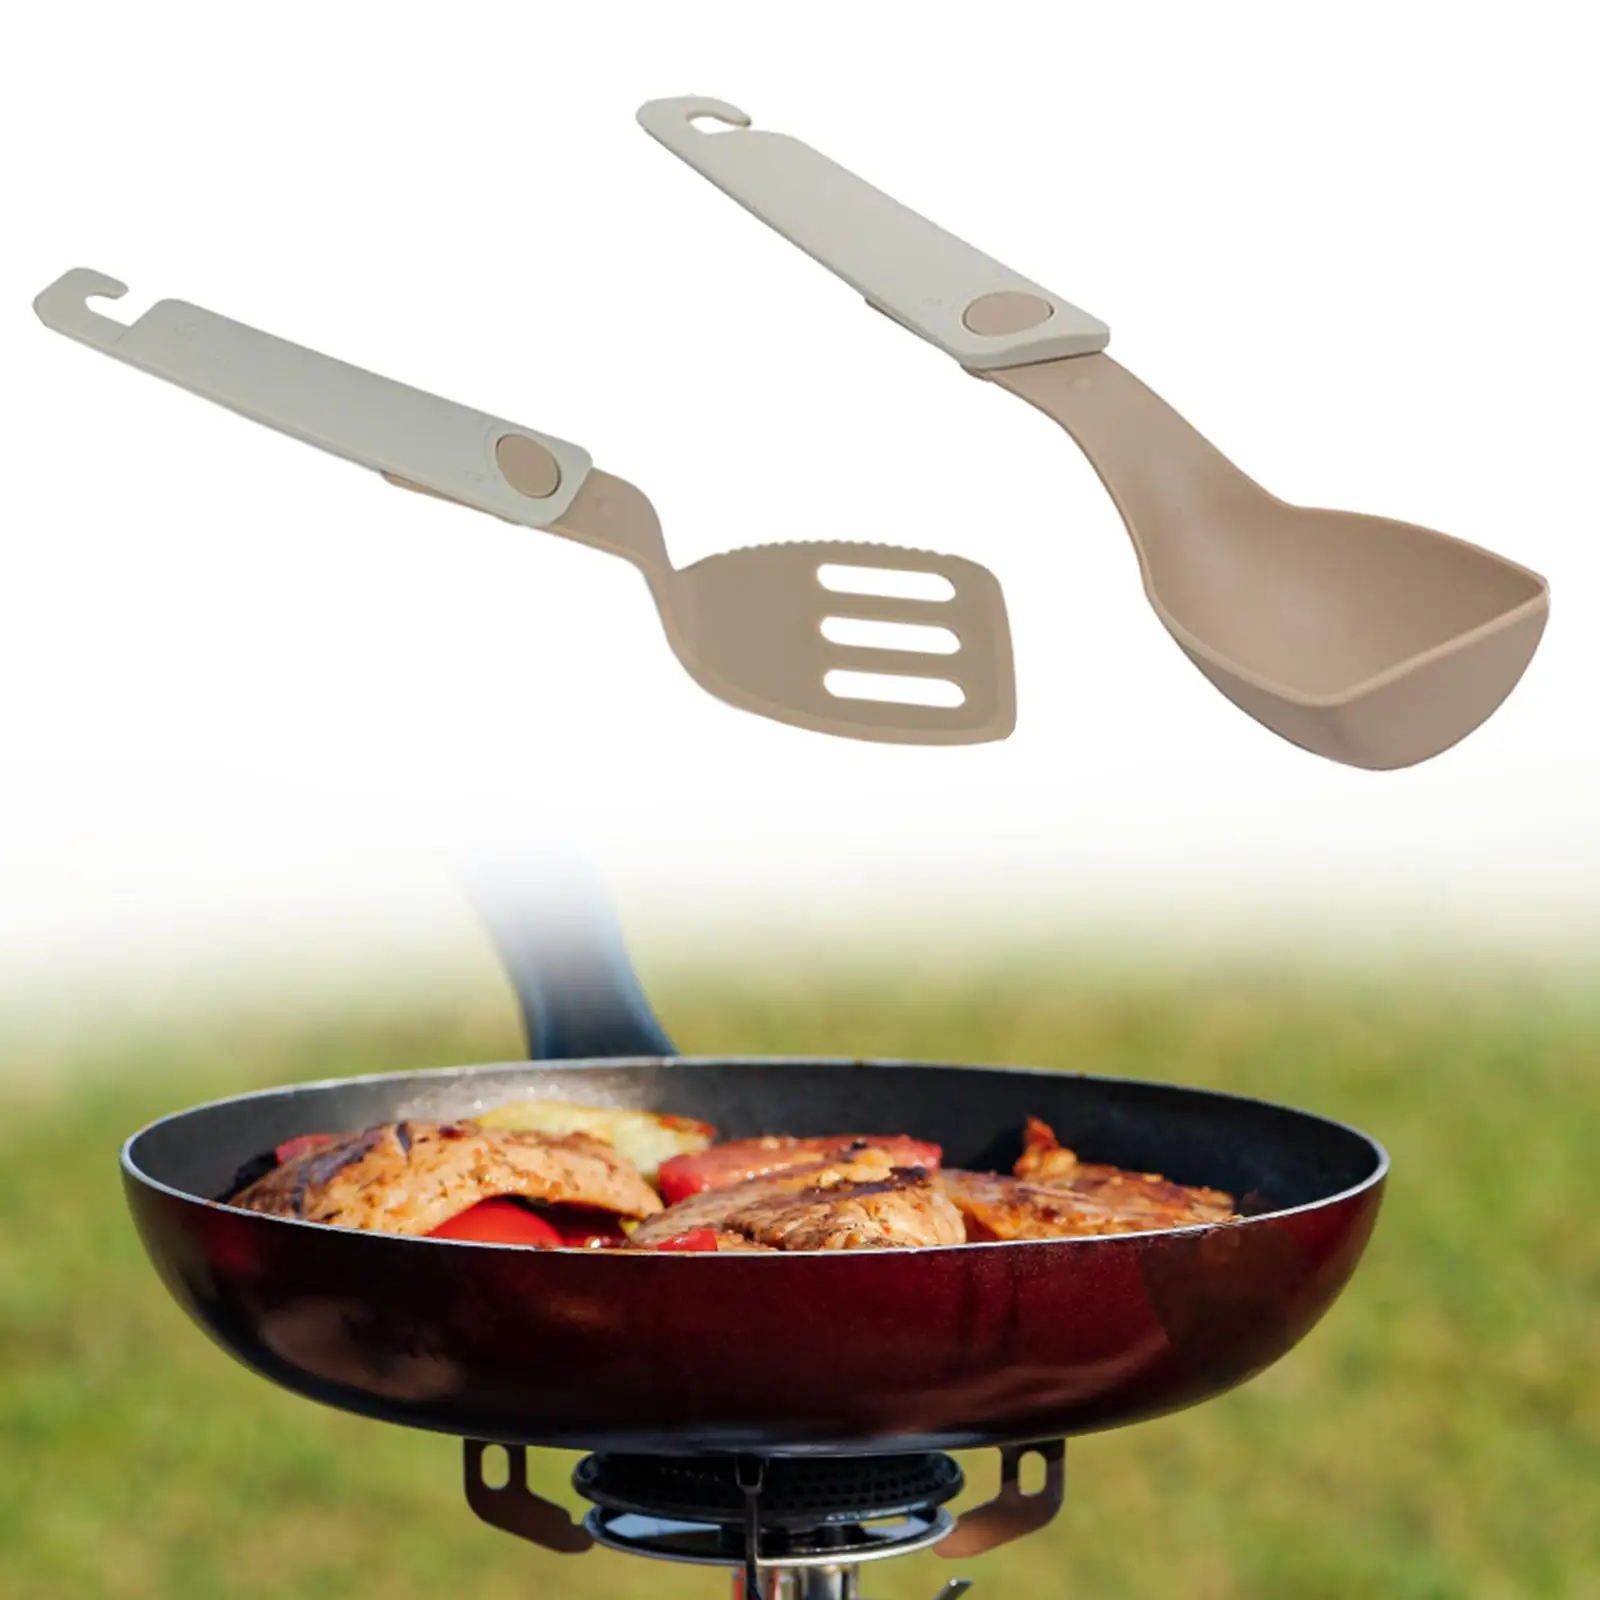 Camping Cutlery Foldable Cooking Utensil Portable Outdoor Tableware Flatware Cookware for Backpacking Hiking Barbecue Picnic BBQ